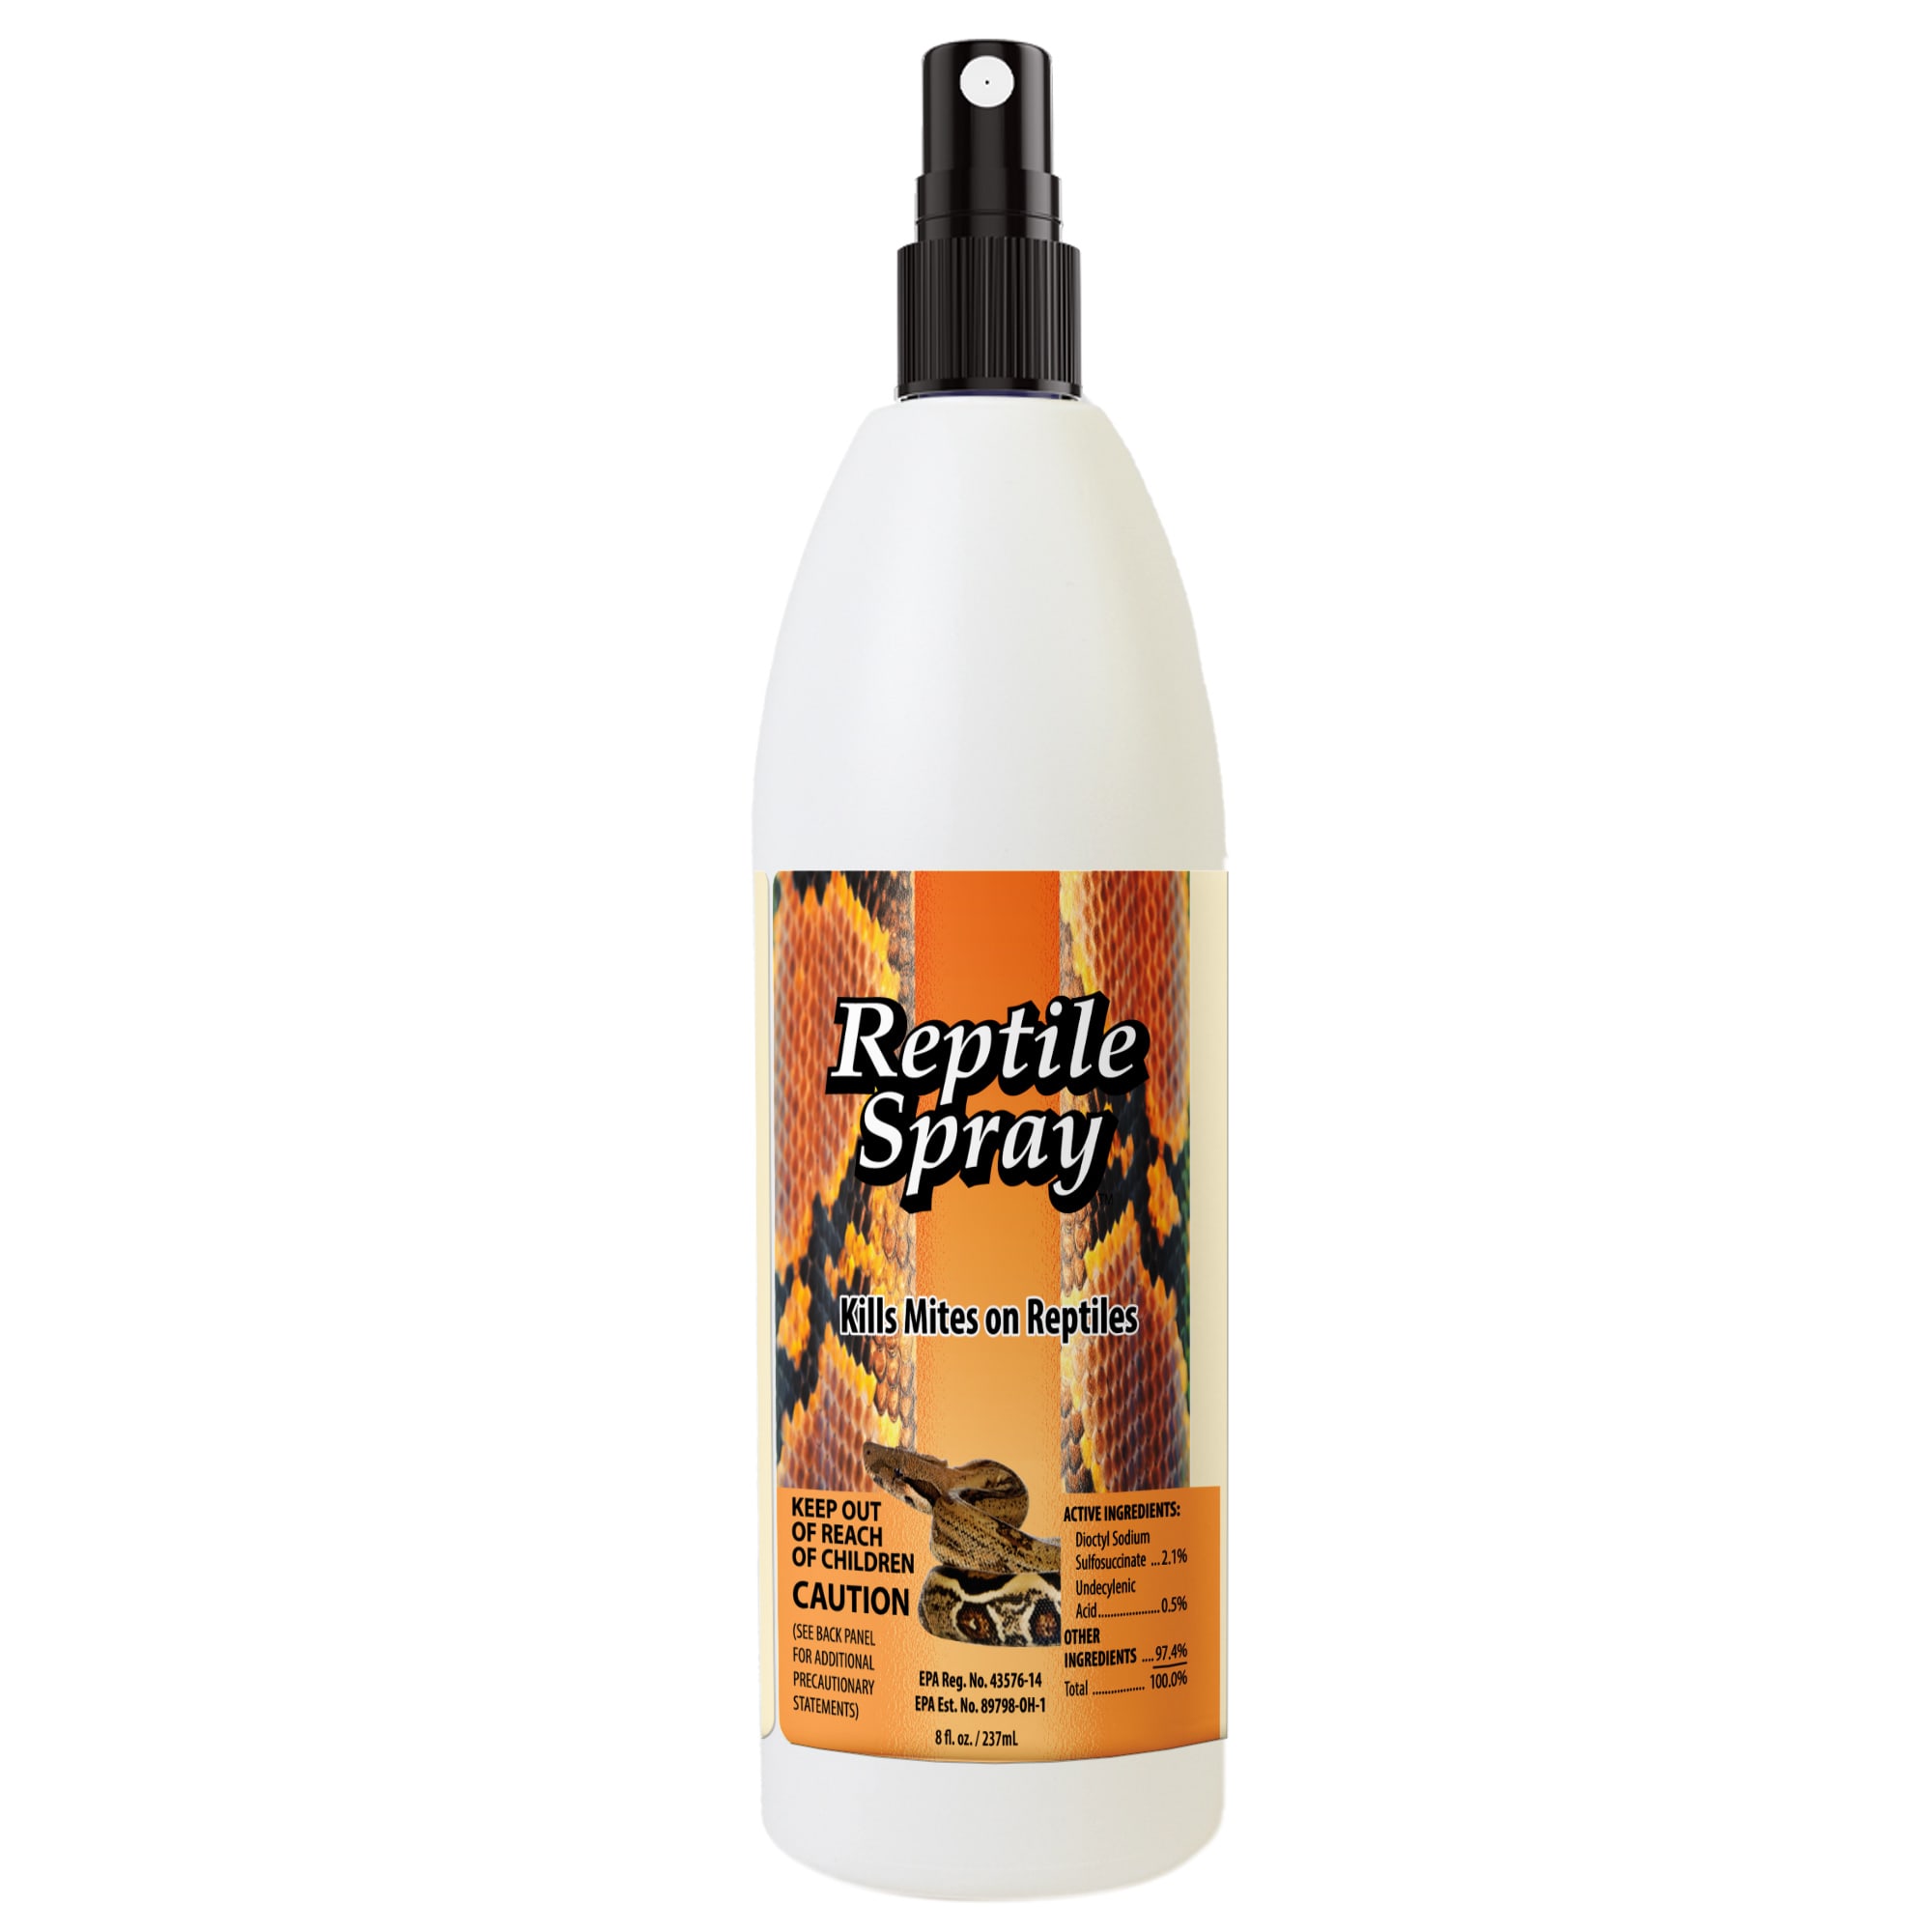 reptile relief by natural chemistry